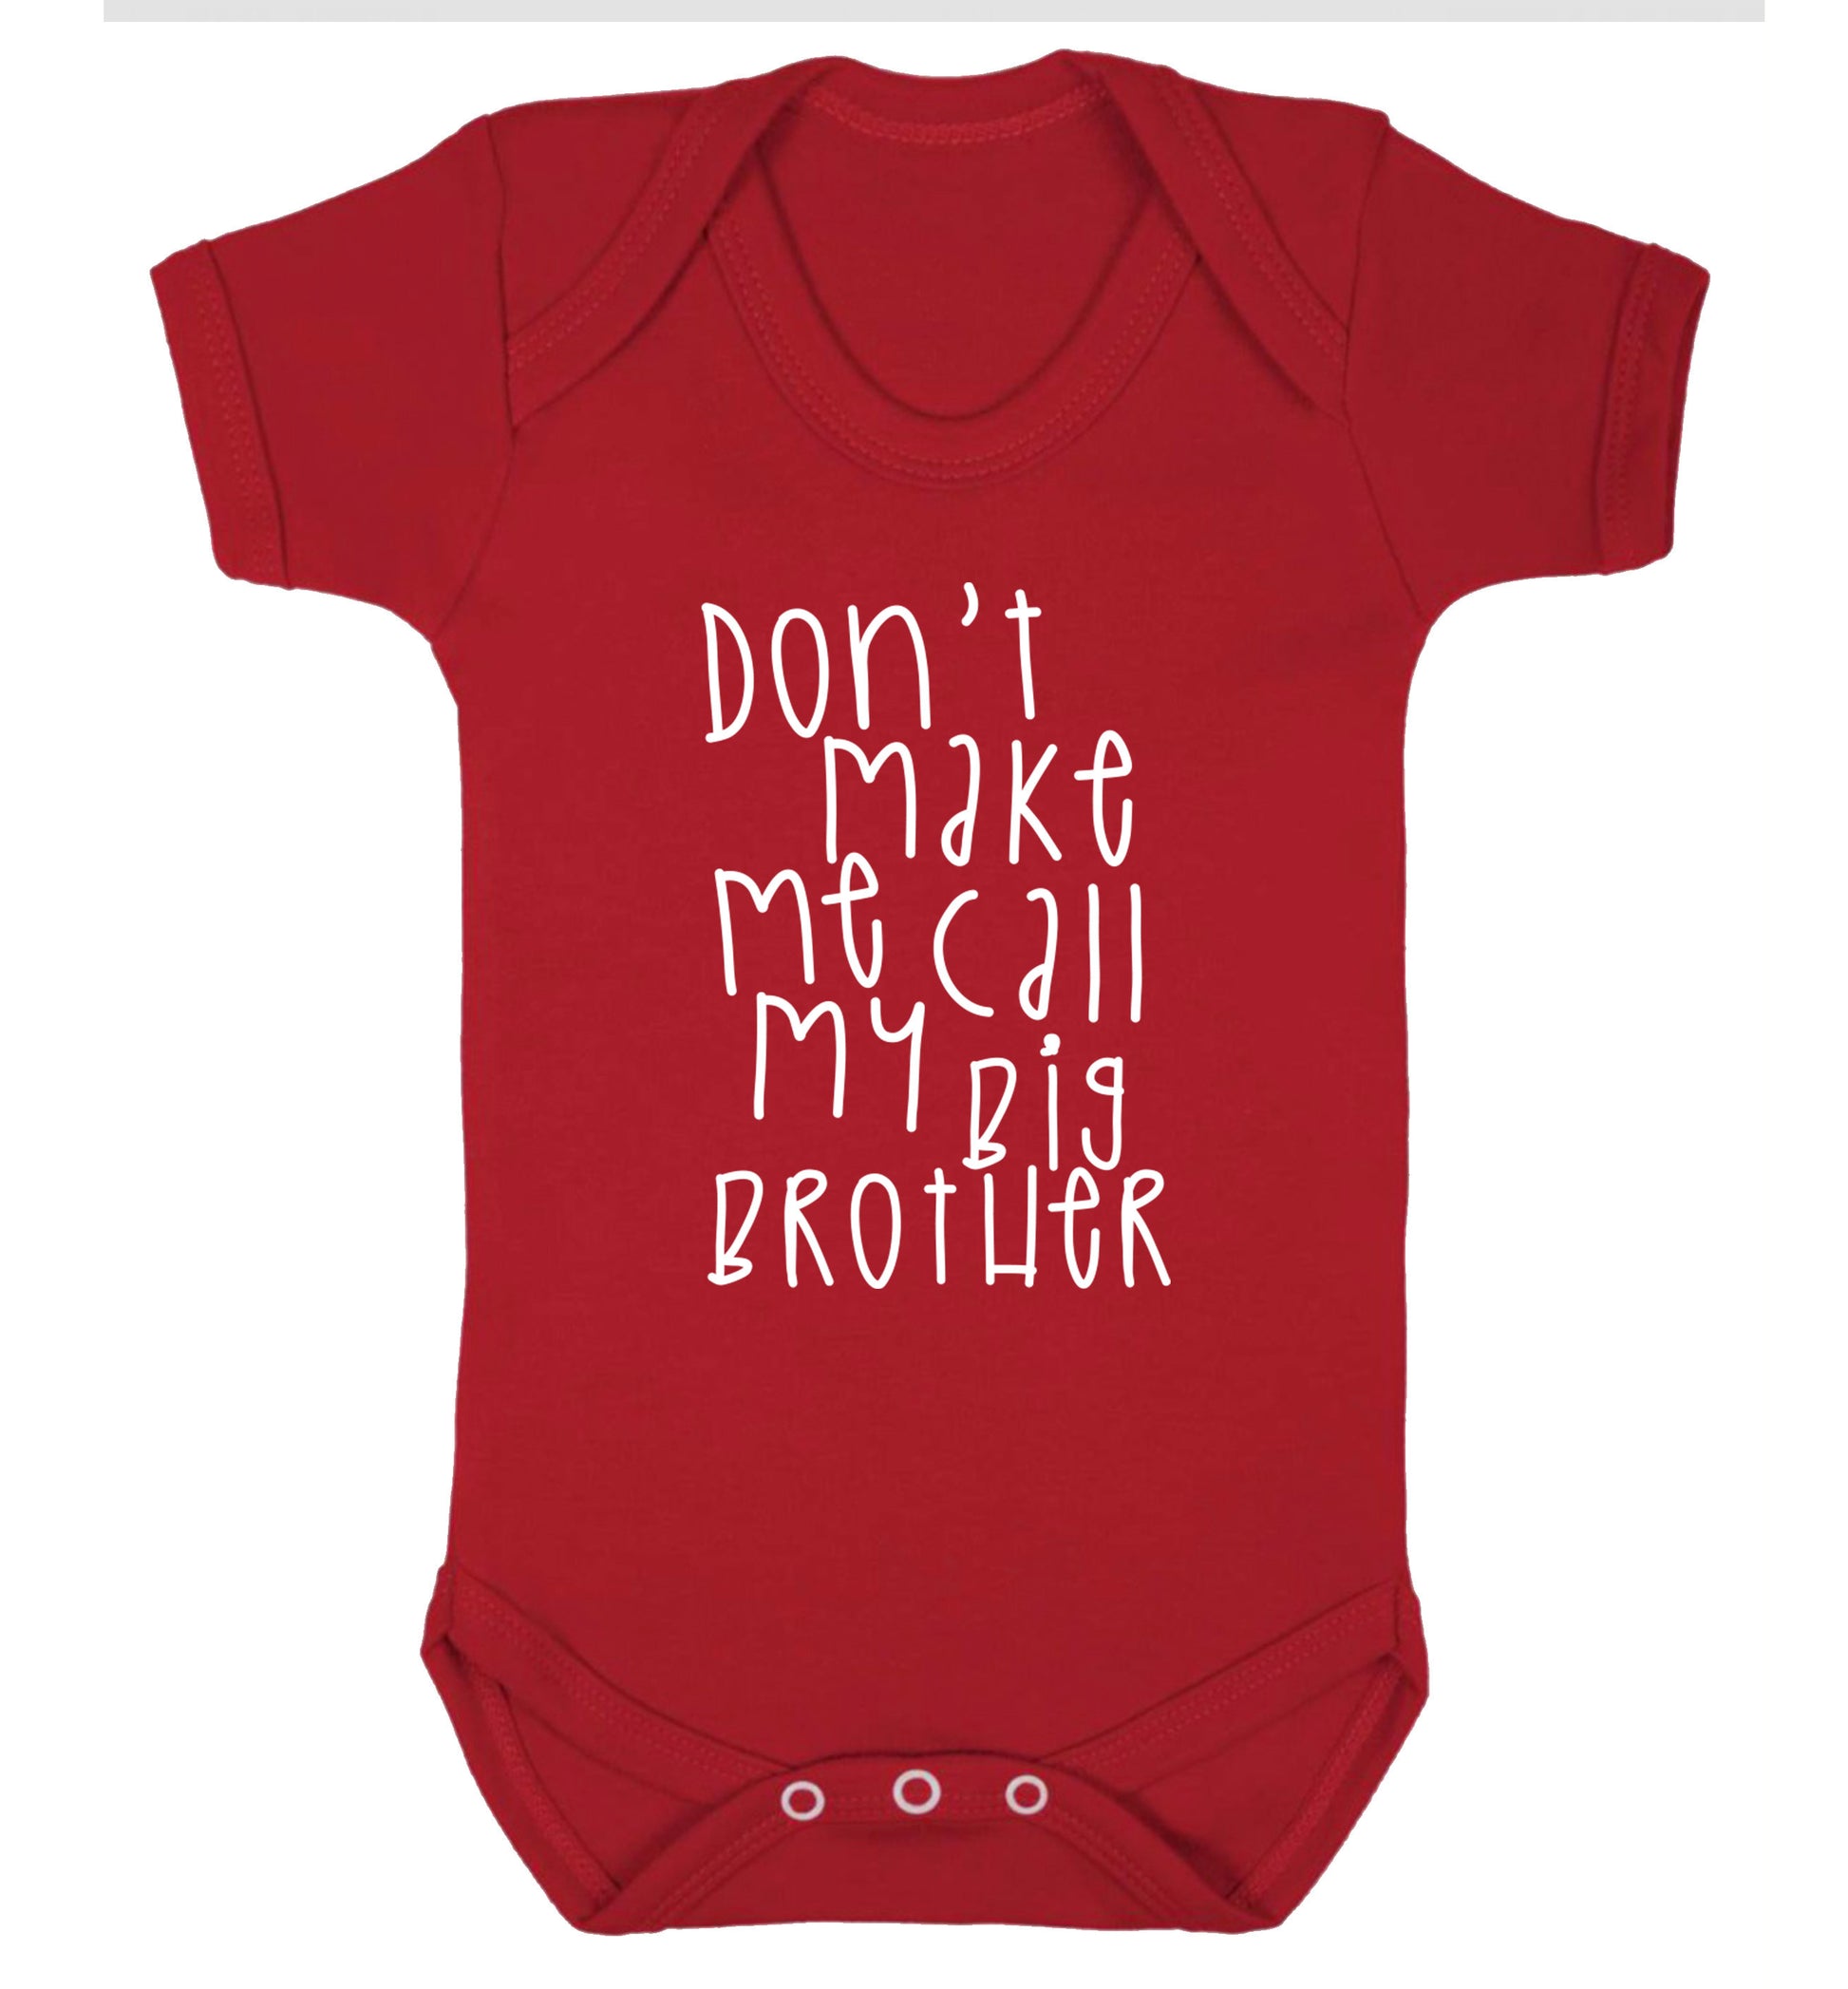 Don't make me call my big brother Baby Vest red 18-24 months